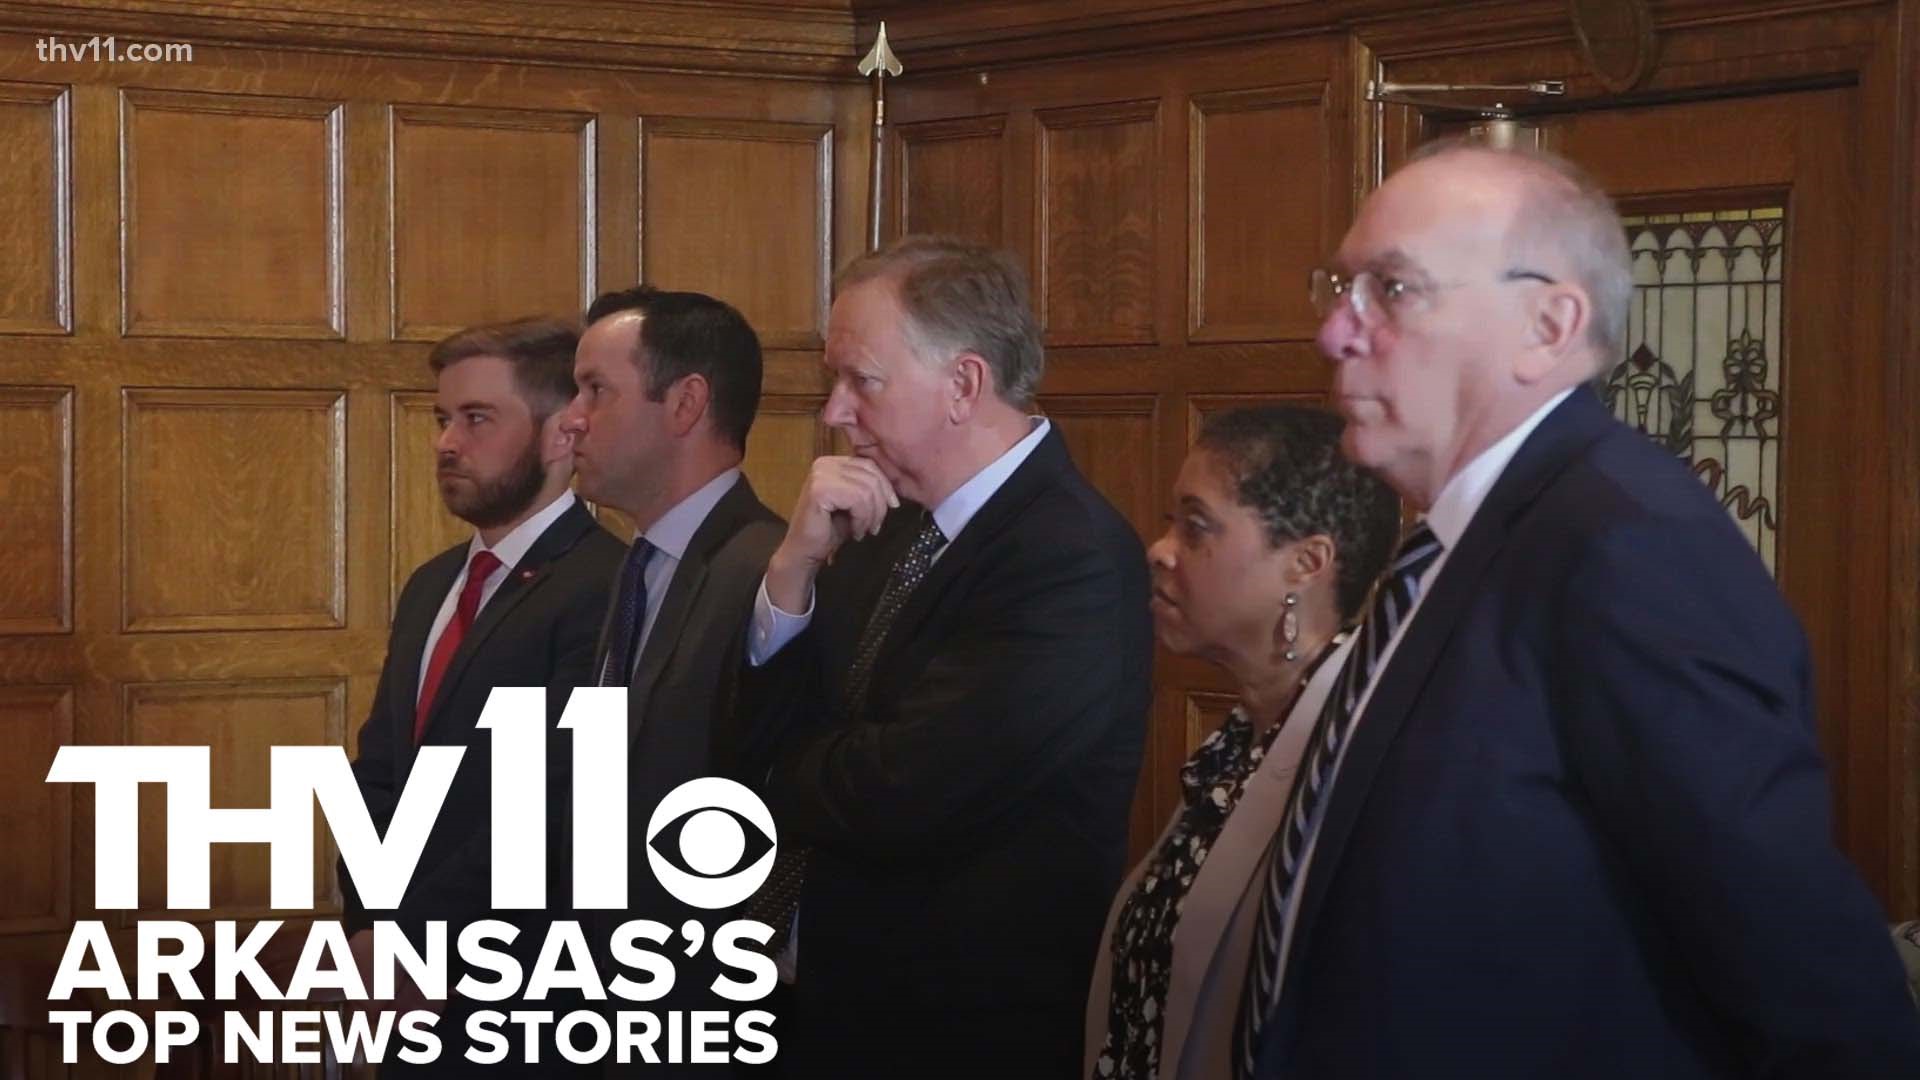 Jurnee Taylor presents Arkansas's top news stories for April 11, 2023, including housing plan progress in Jacksonville and new tax cuts signed into law.